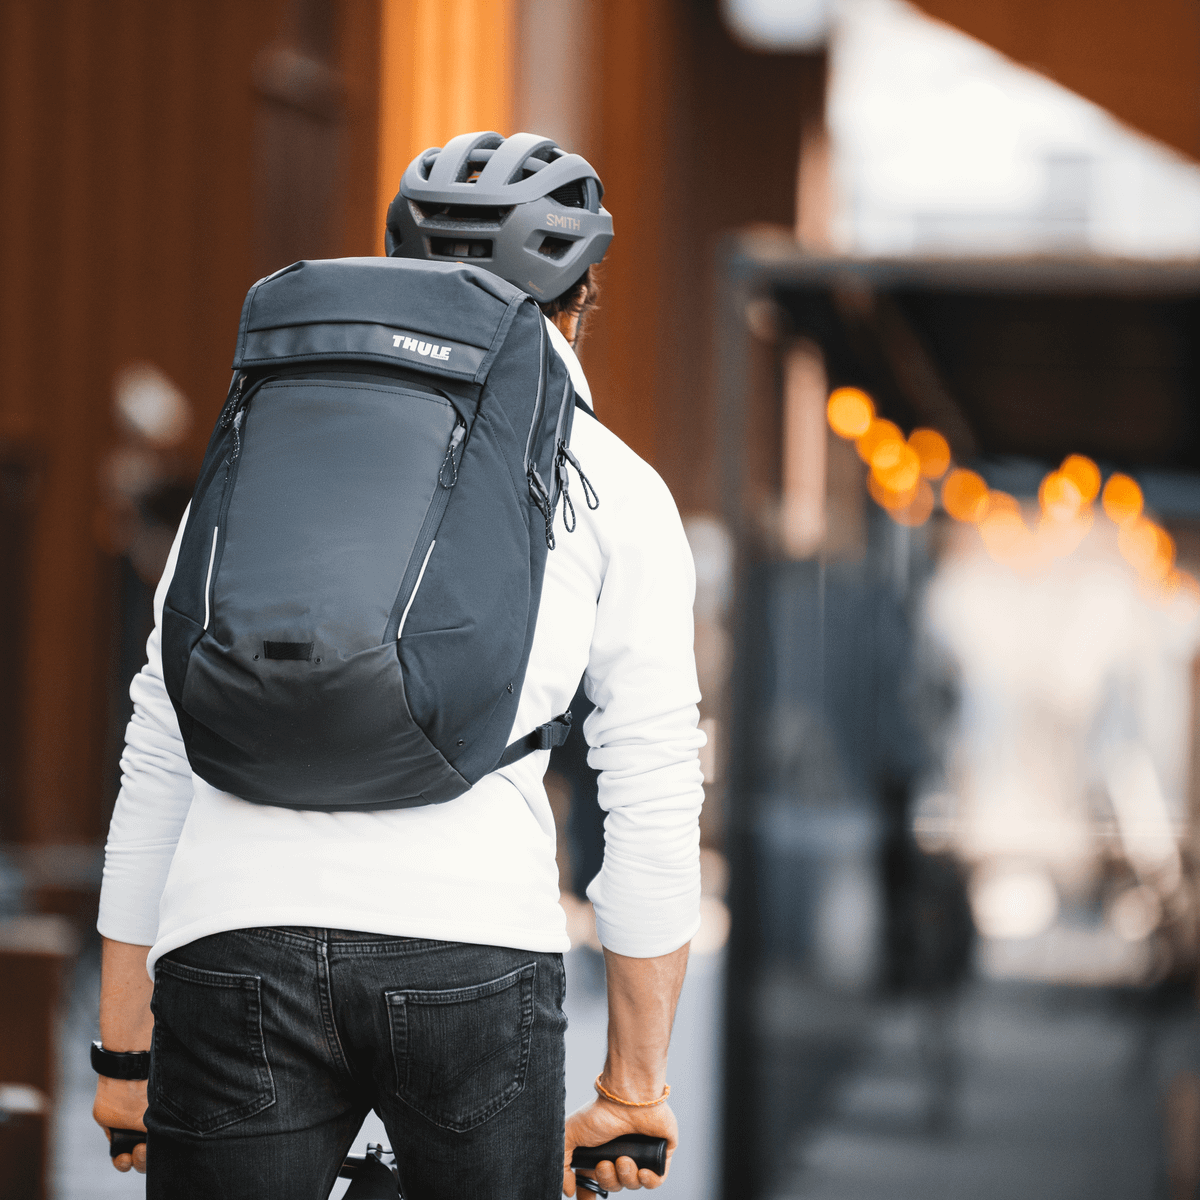 A cyclist bikes through a city street carrying a black 27L Thule Paramount Commuter Backpack.